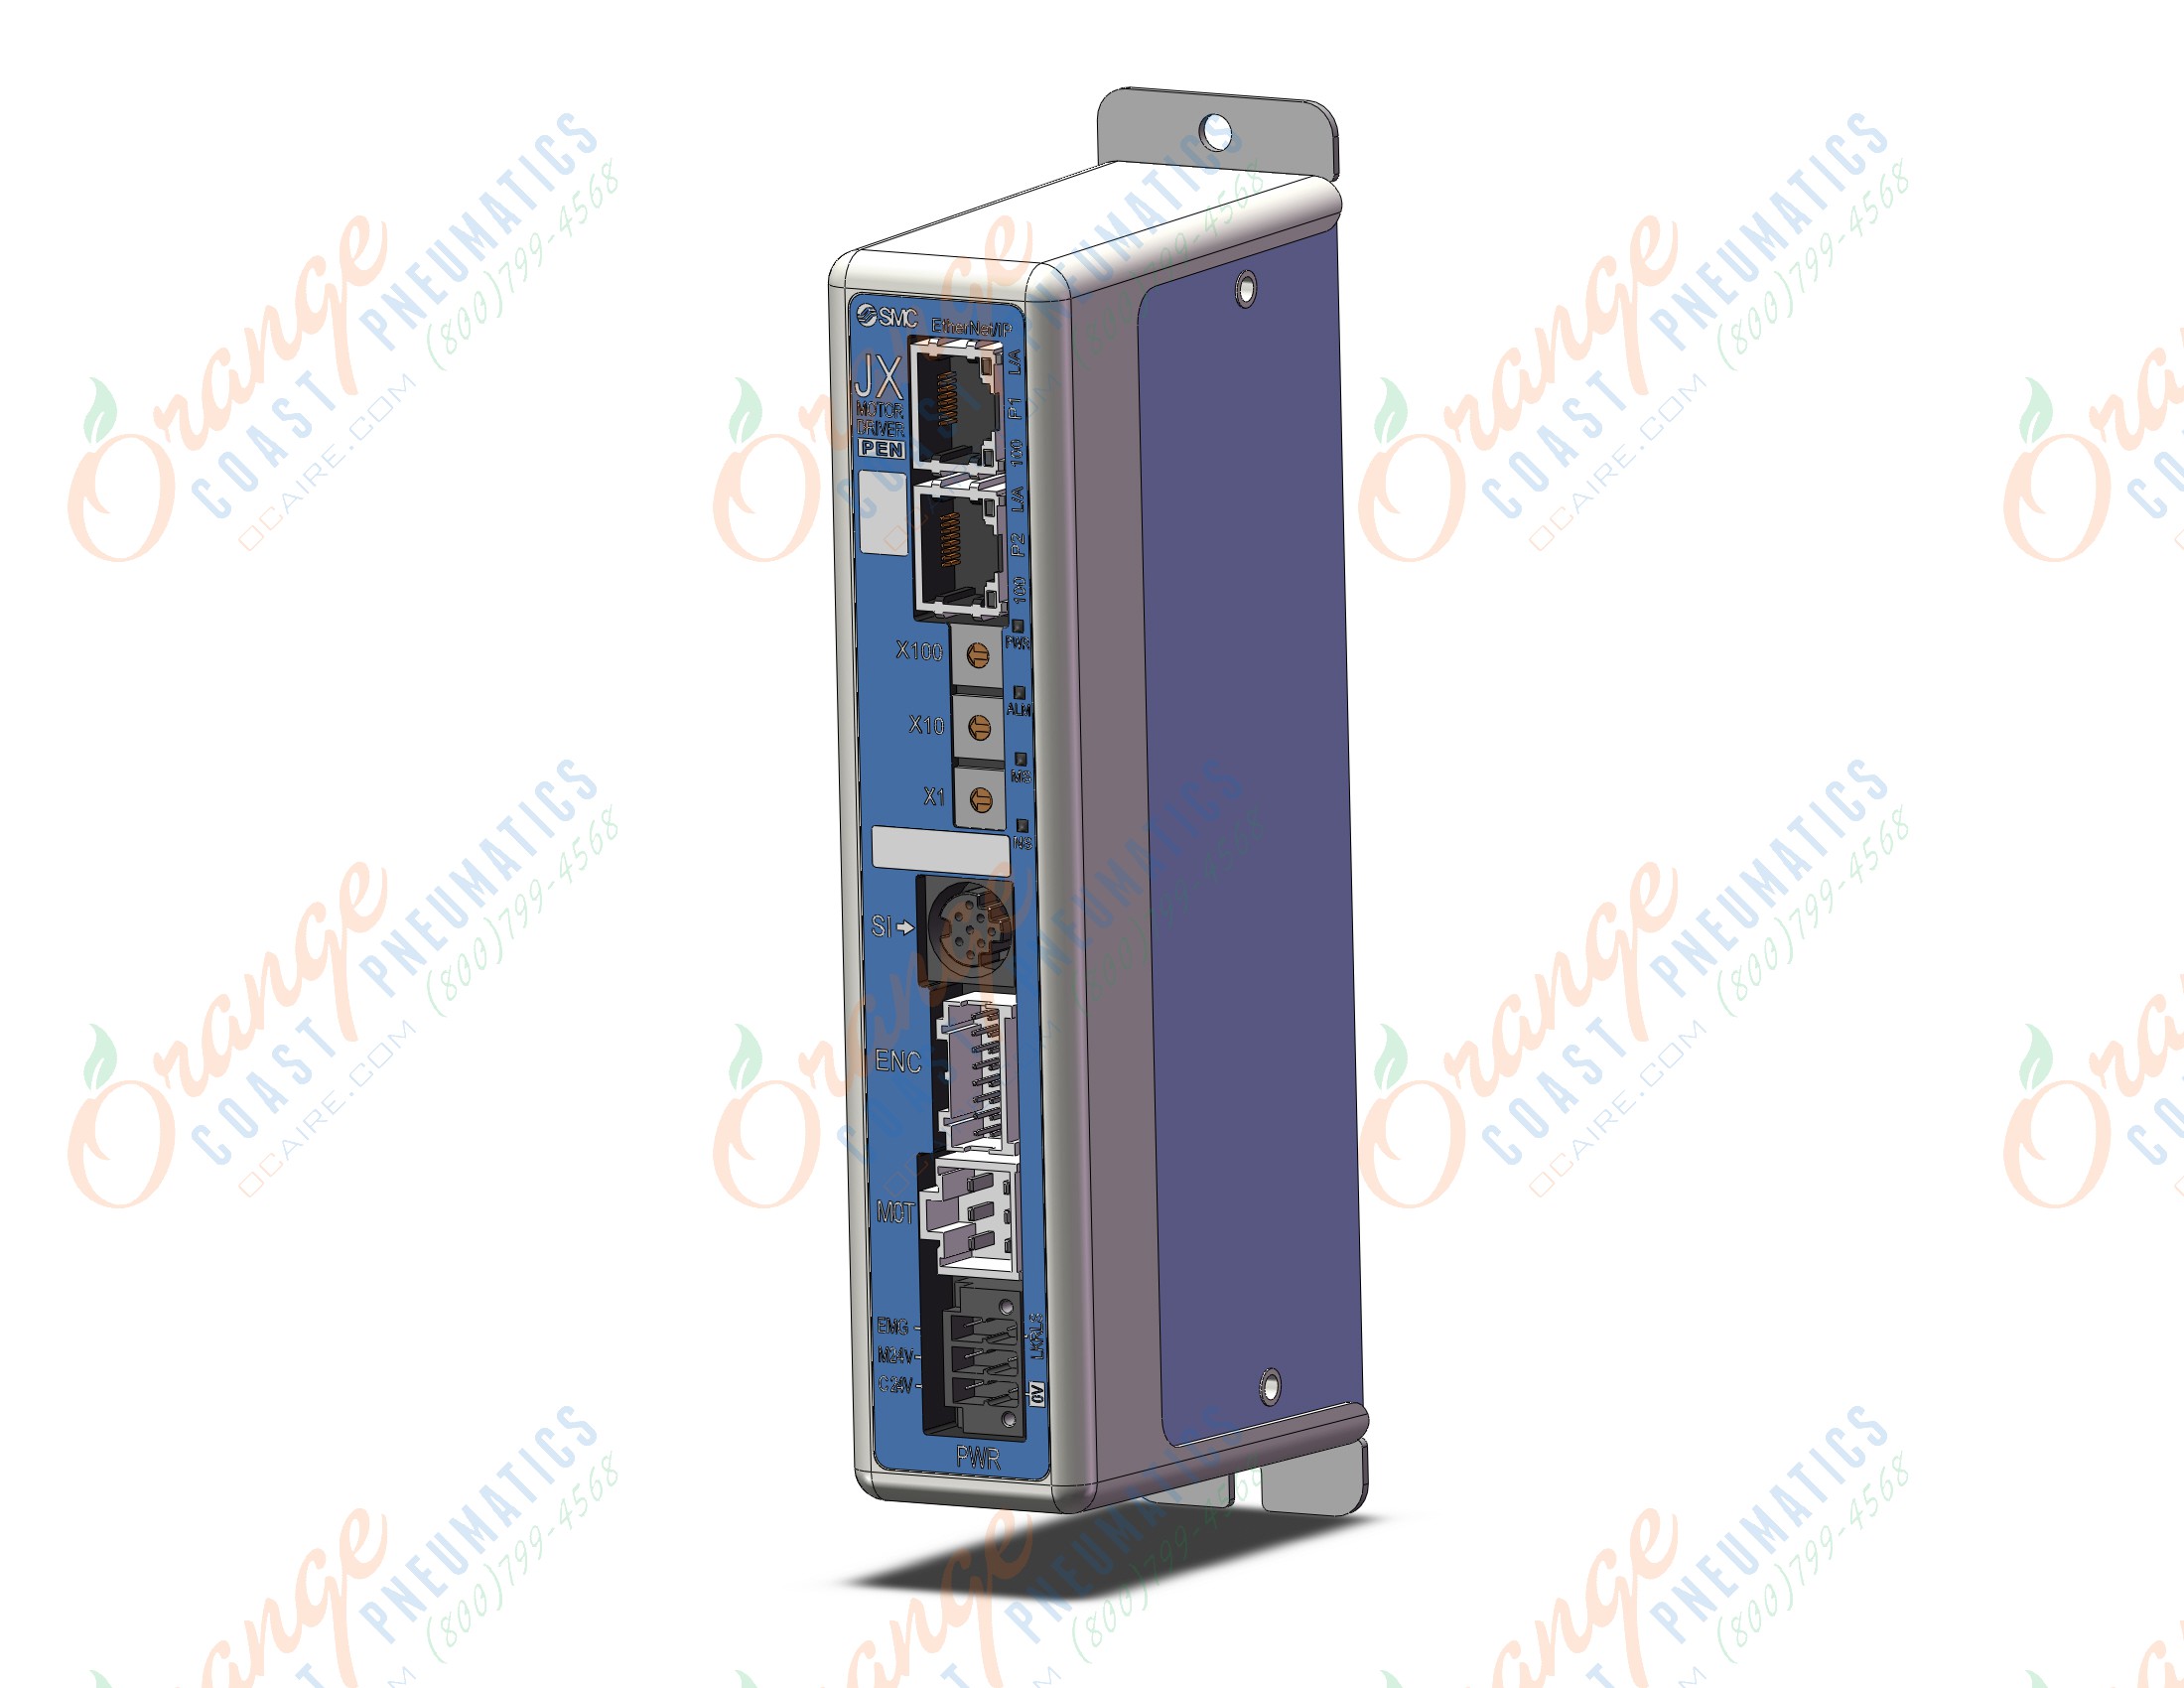 SMC JXC917-LEYG25MB-100 ethernet/ip direct connect, ELECTRIC ACTUATOR CONTROLLER